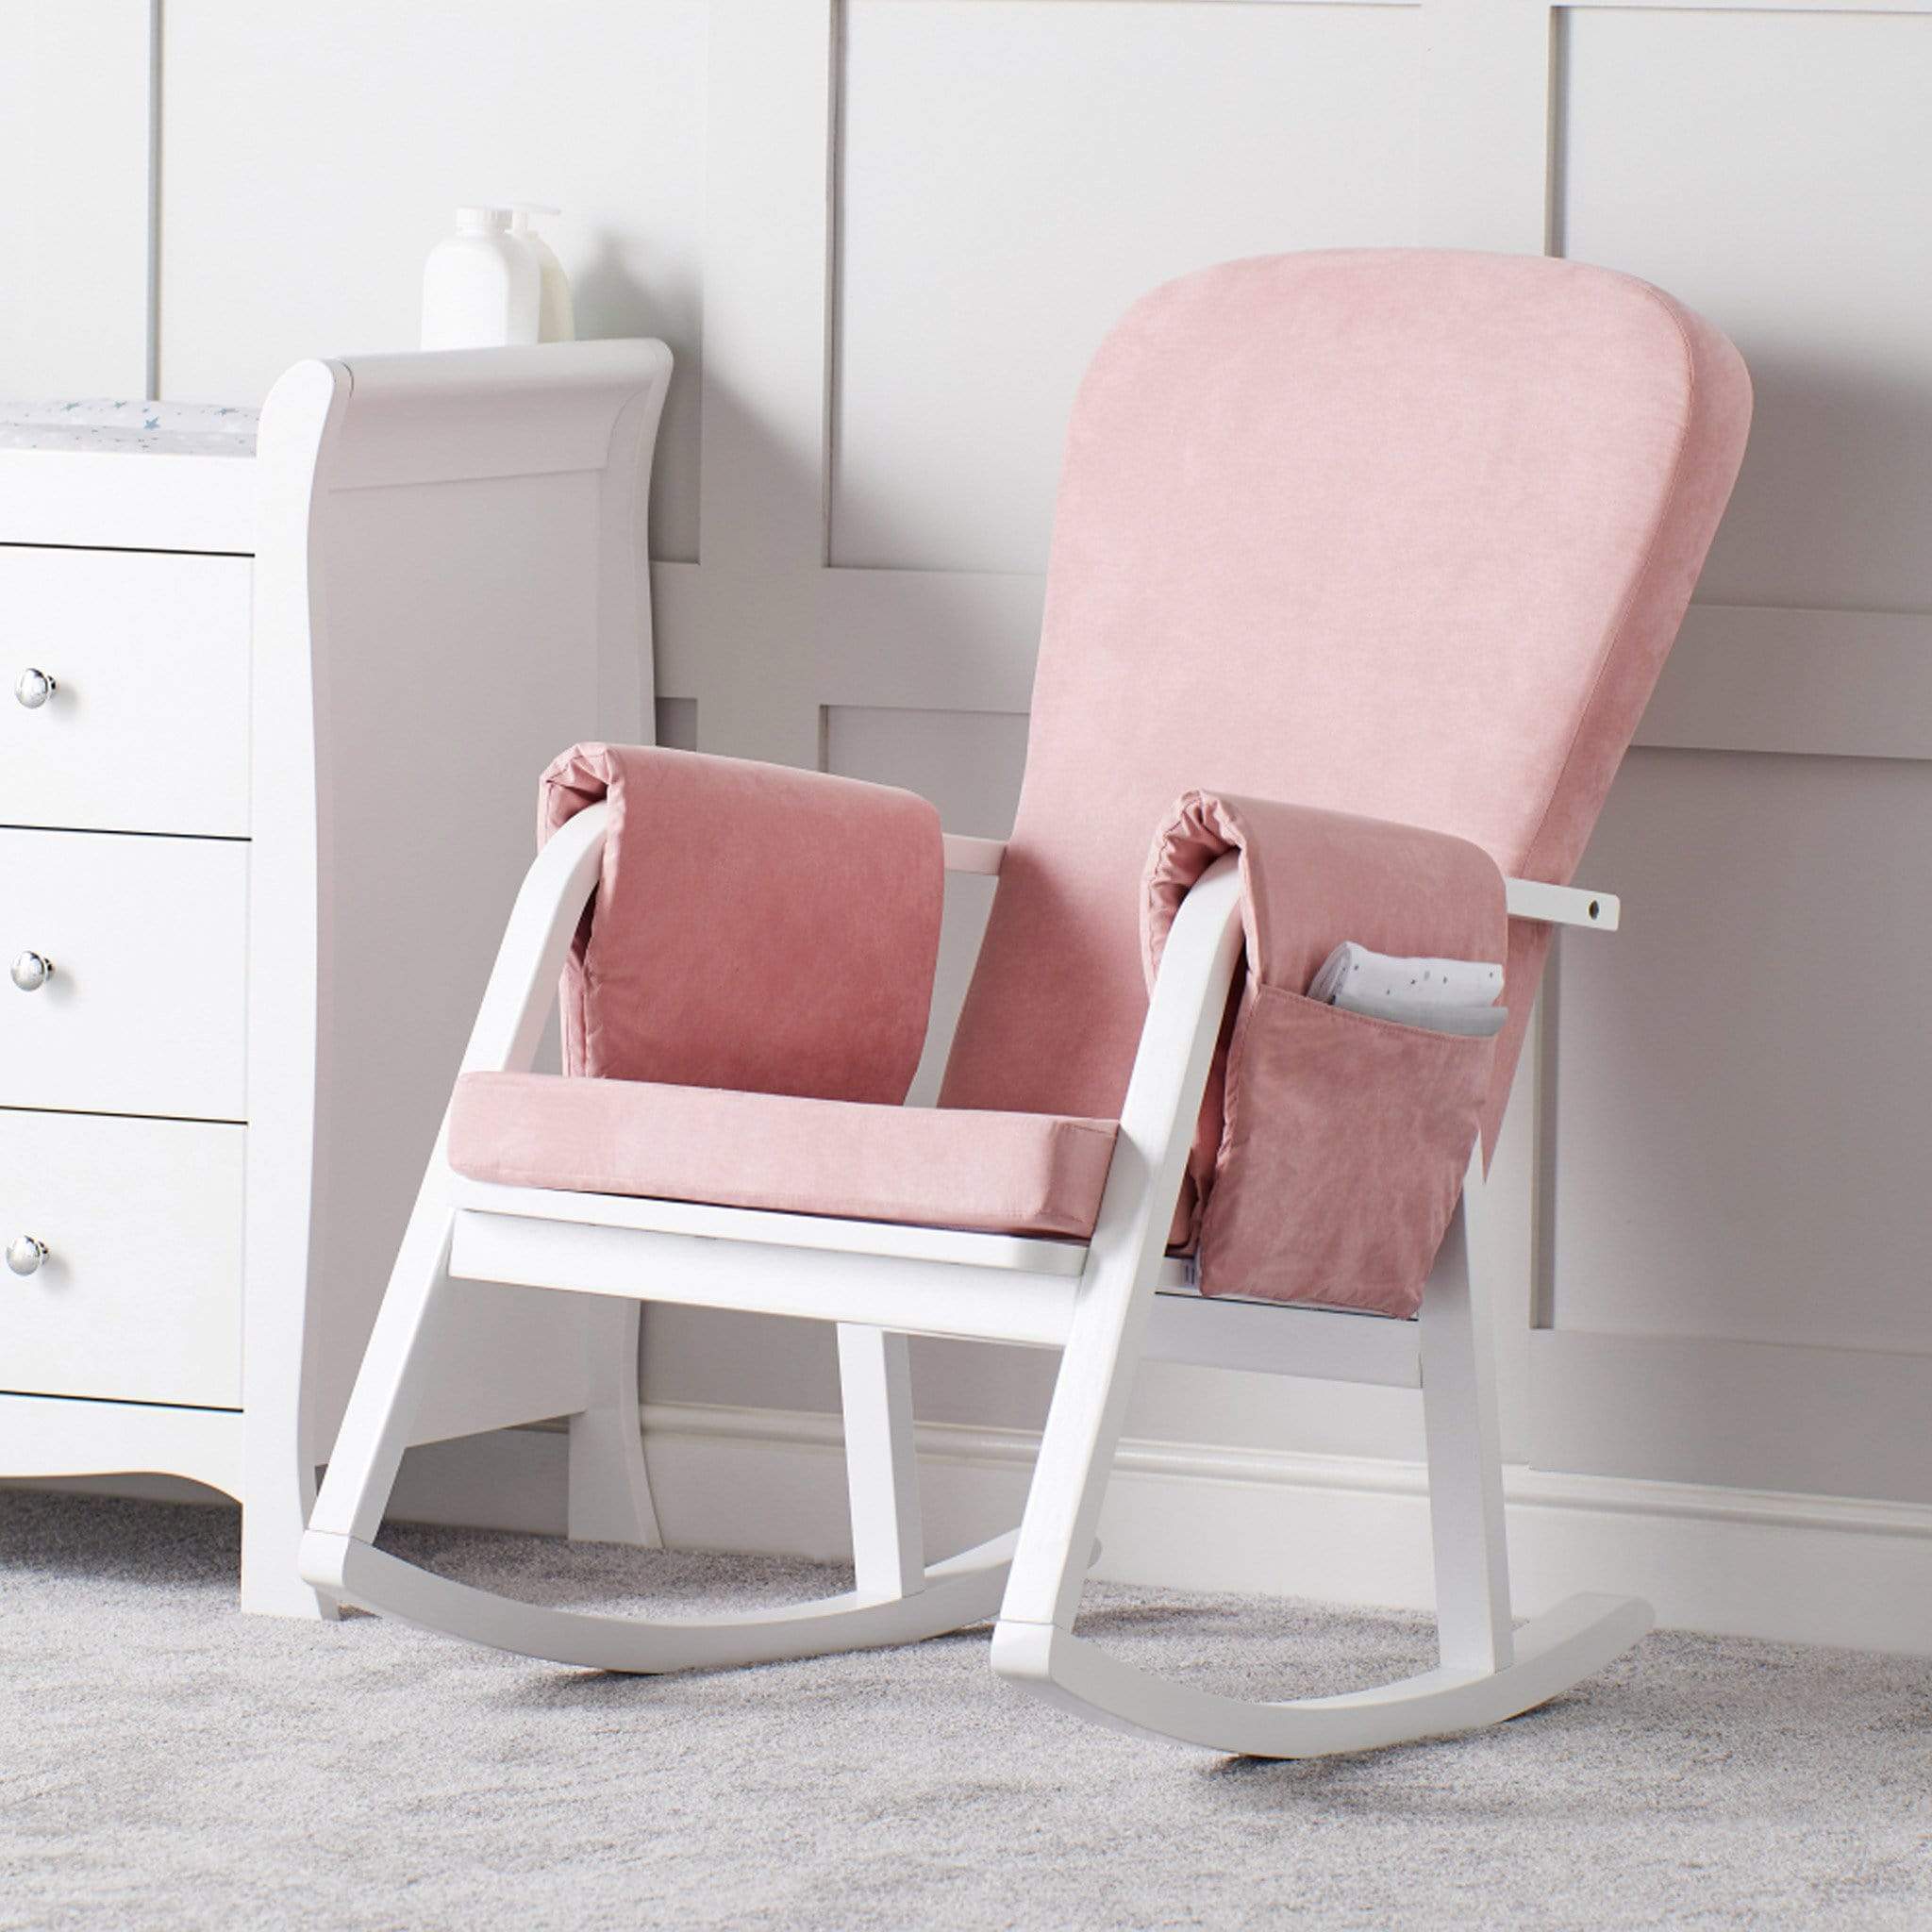 Ickle Bubba nursing chairs Ickle Bubba Dursley Rocking Chair Blush Pink 48-004-000-841